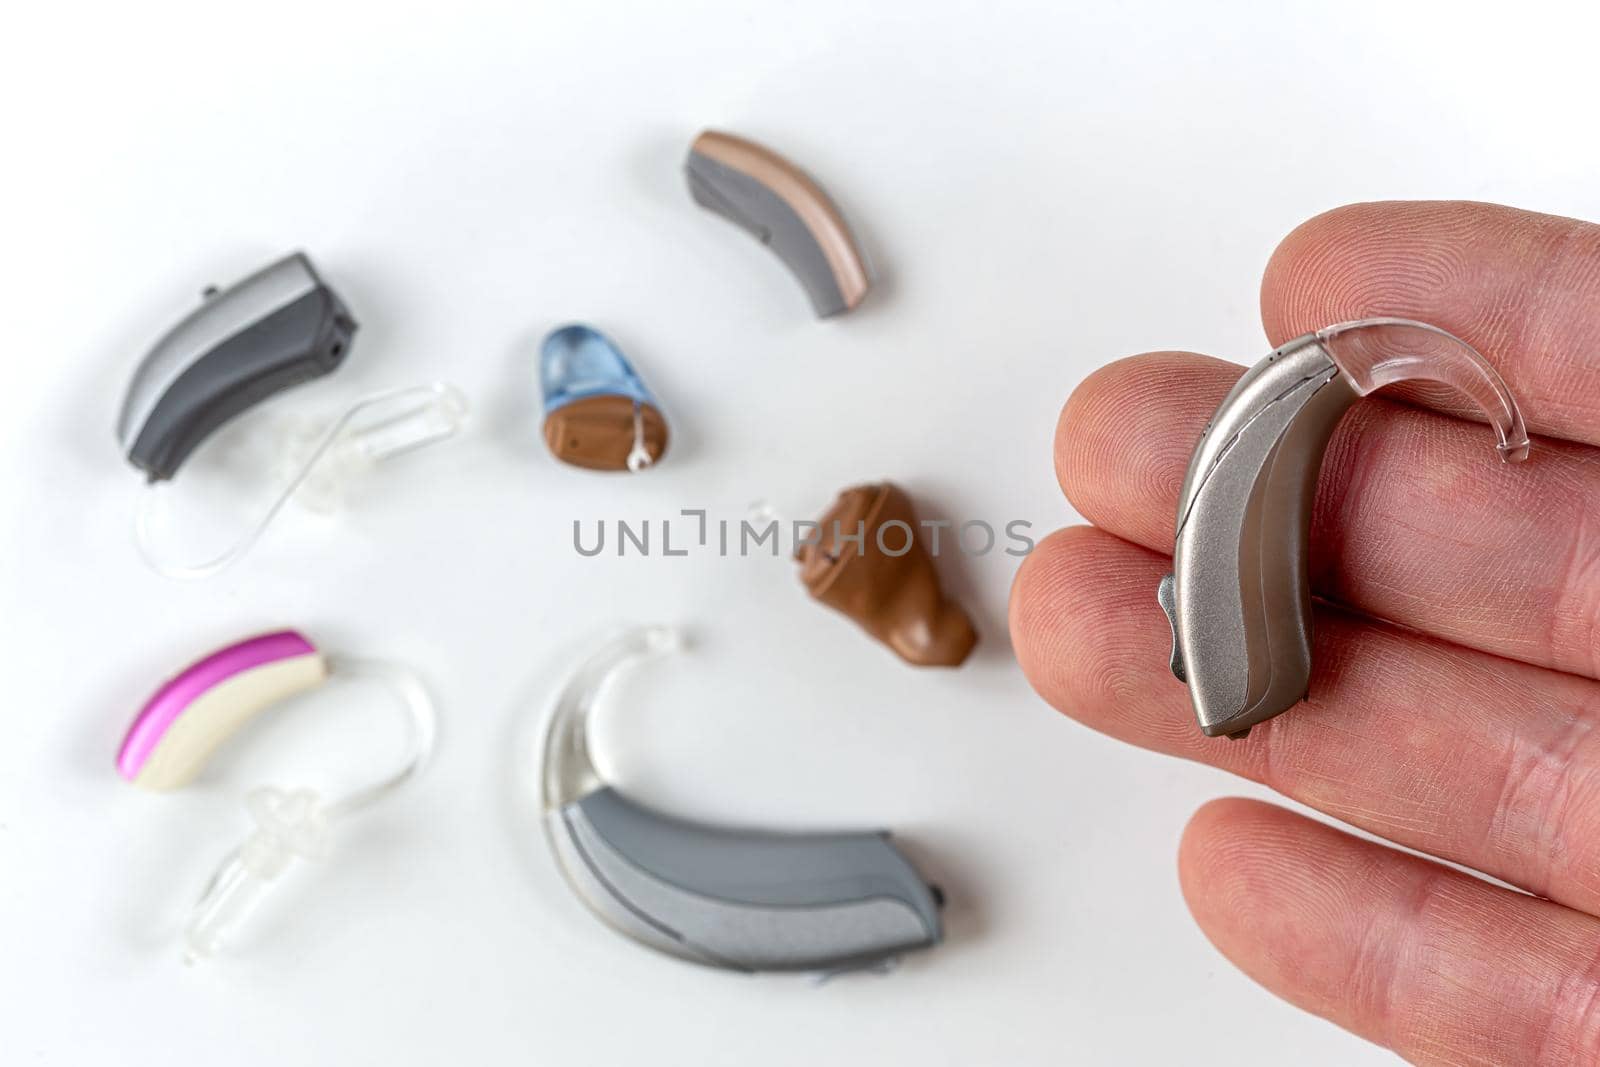 In-ear prosthesis on a finger, surrounded by other models.